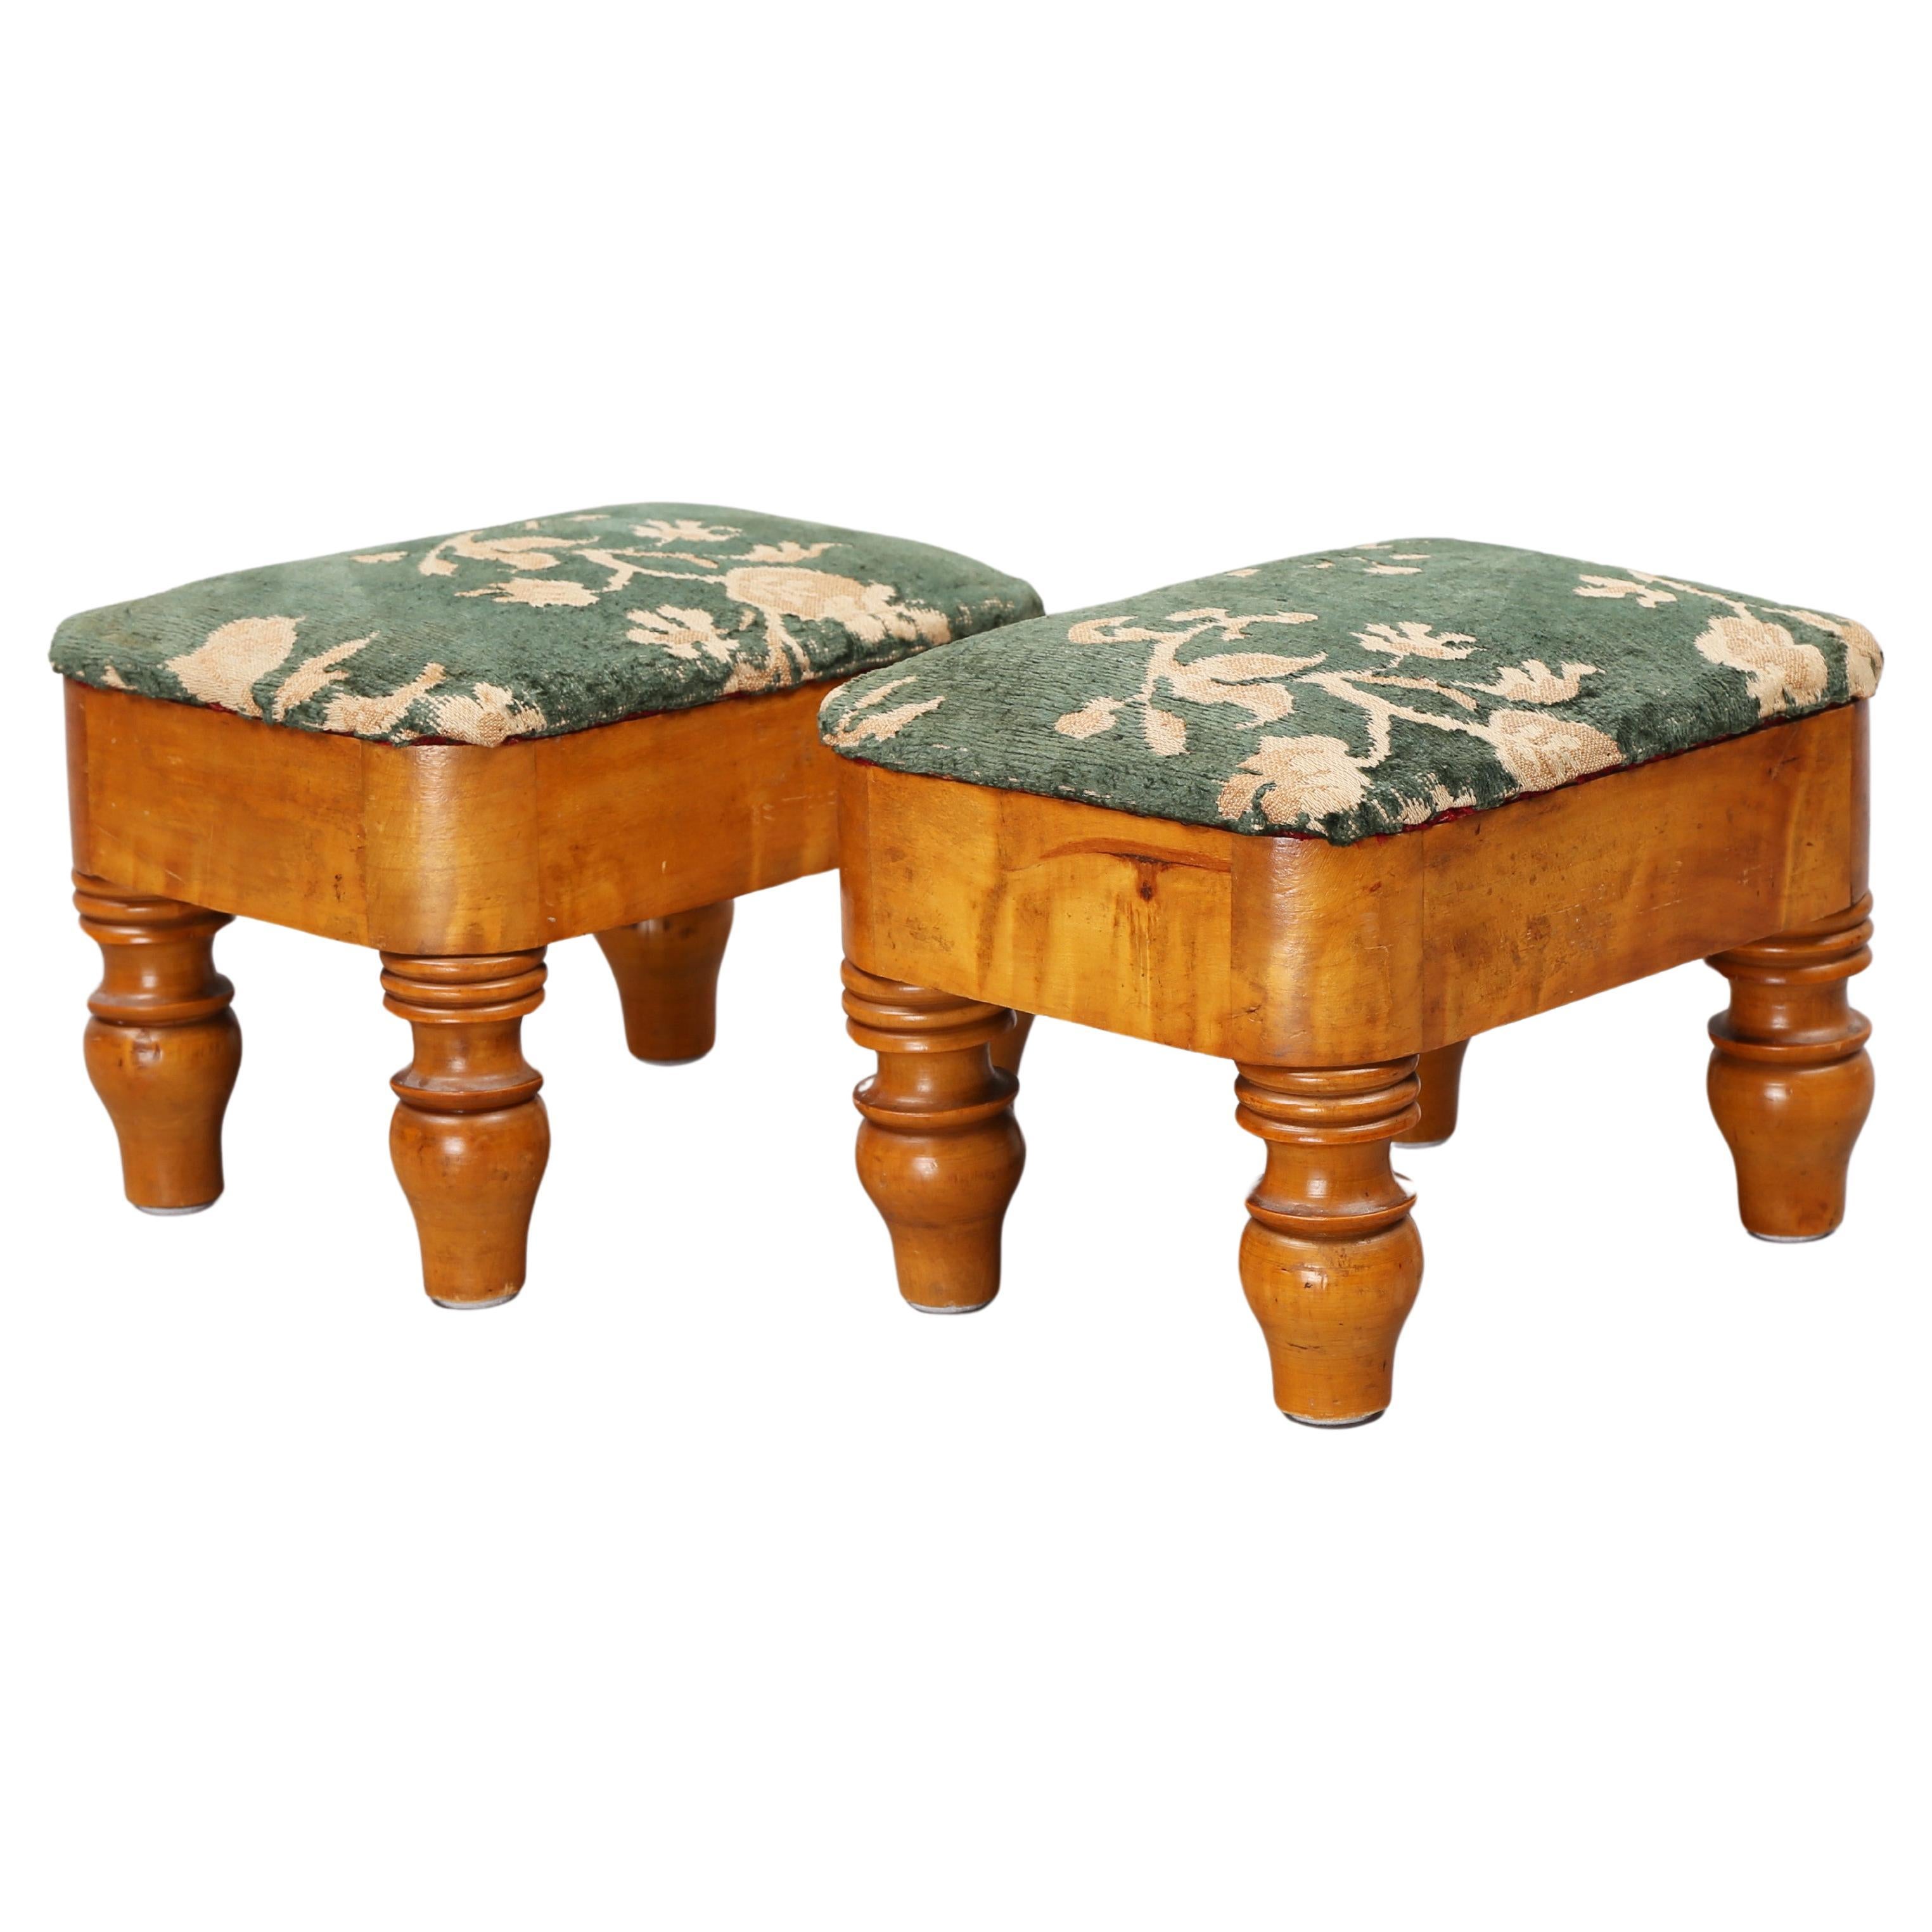 Pair of Swedish Cabinetmaker Footstools in Birch and Green Velvet Upholstery For Sale